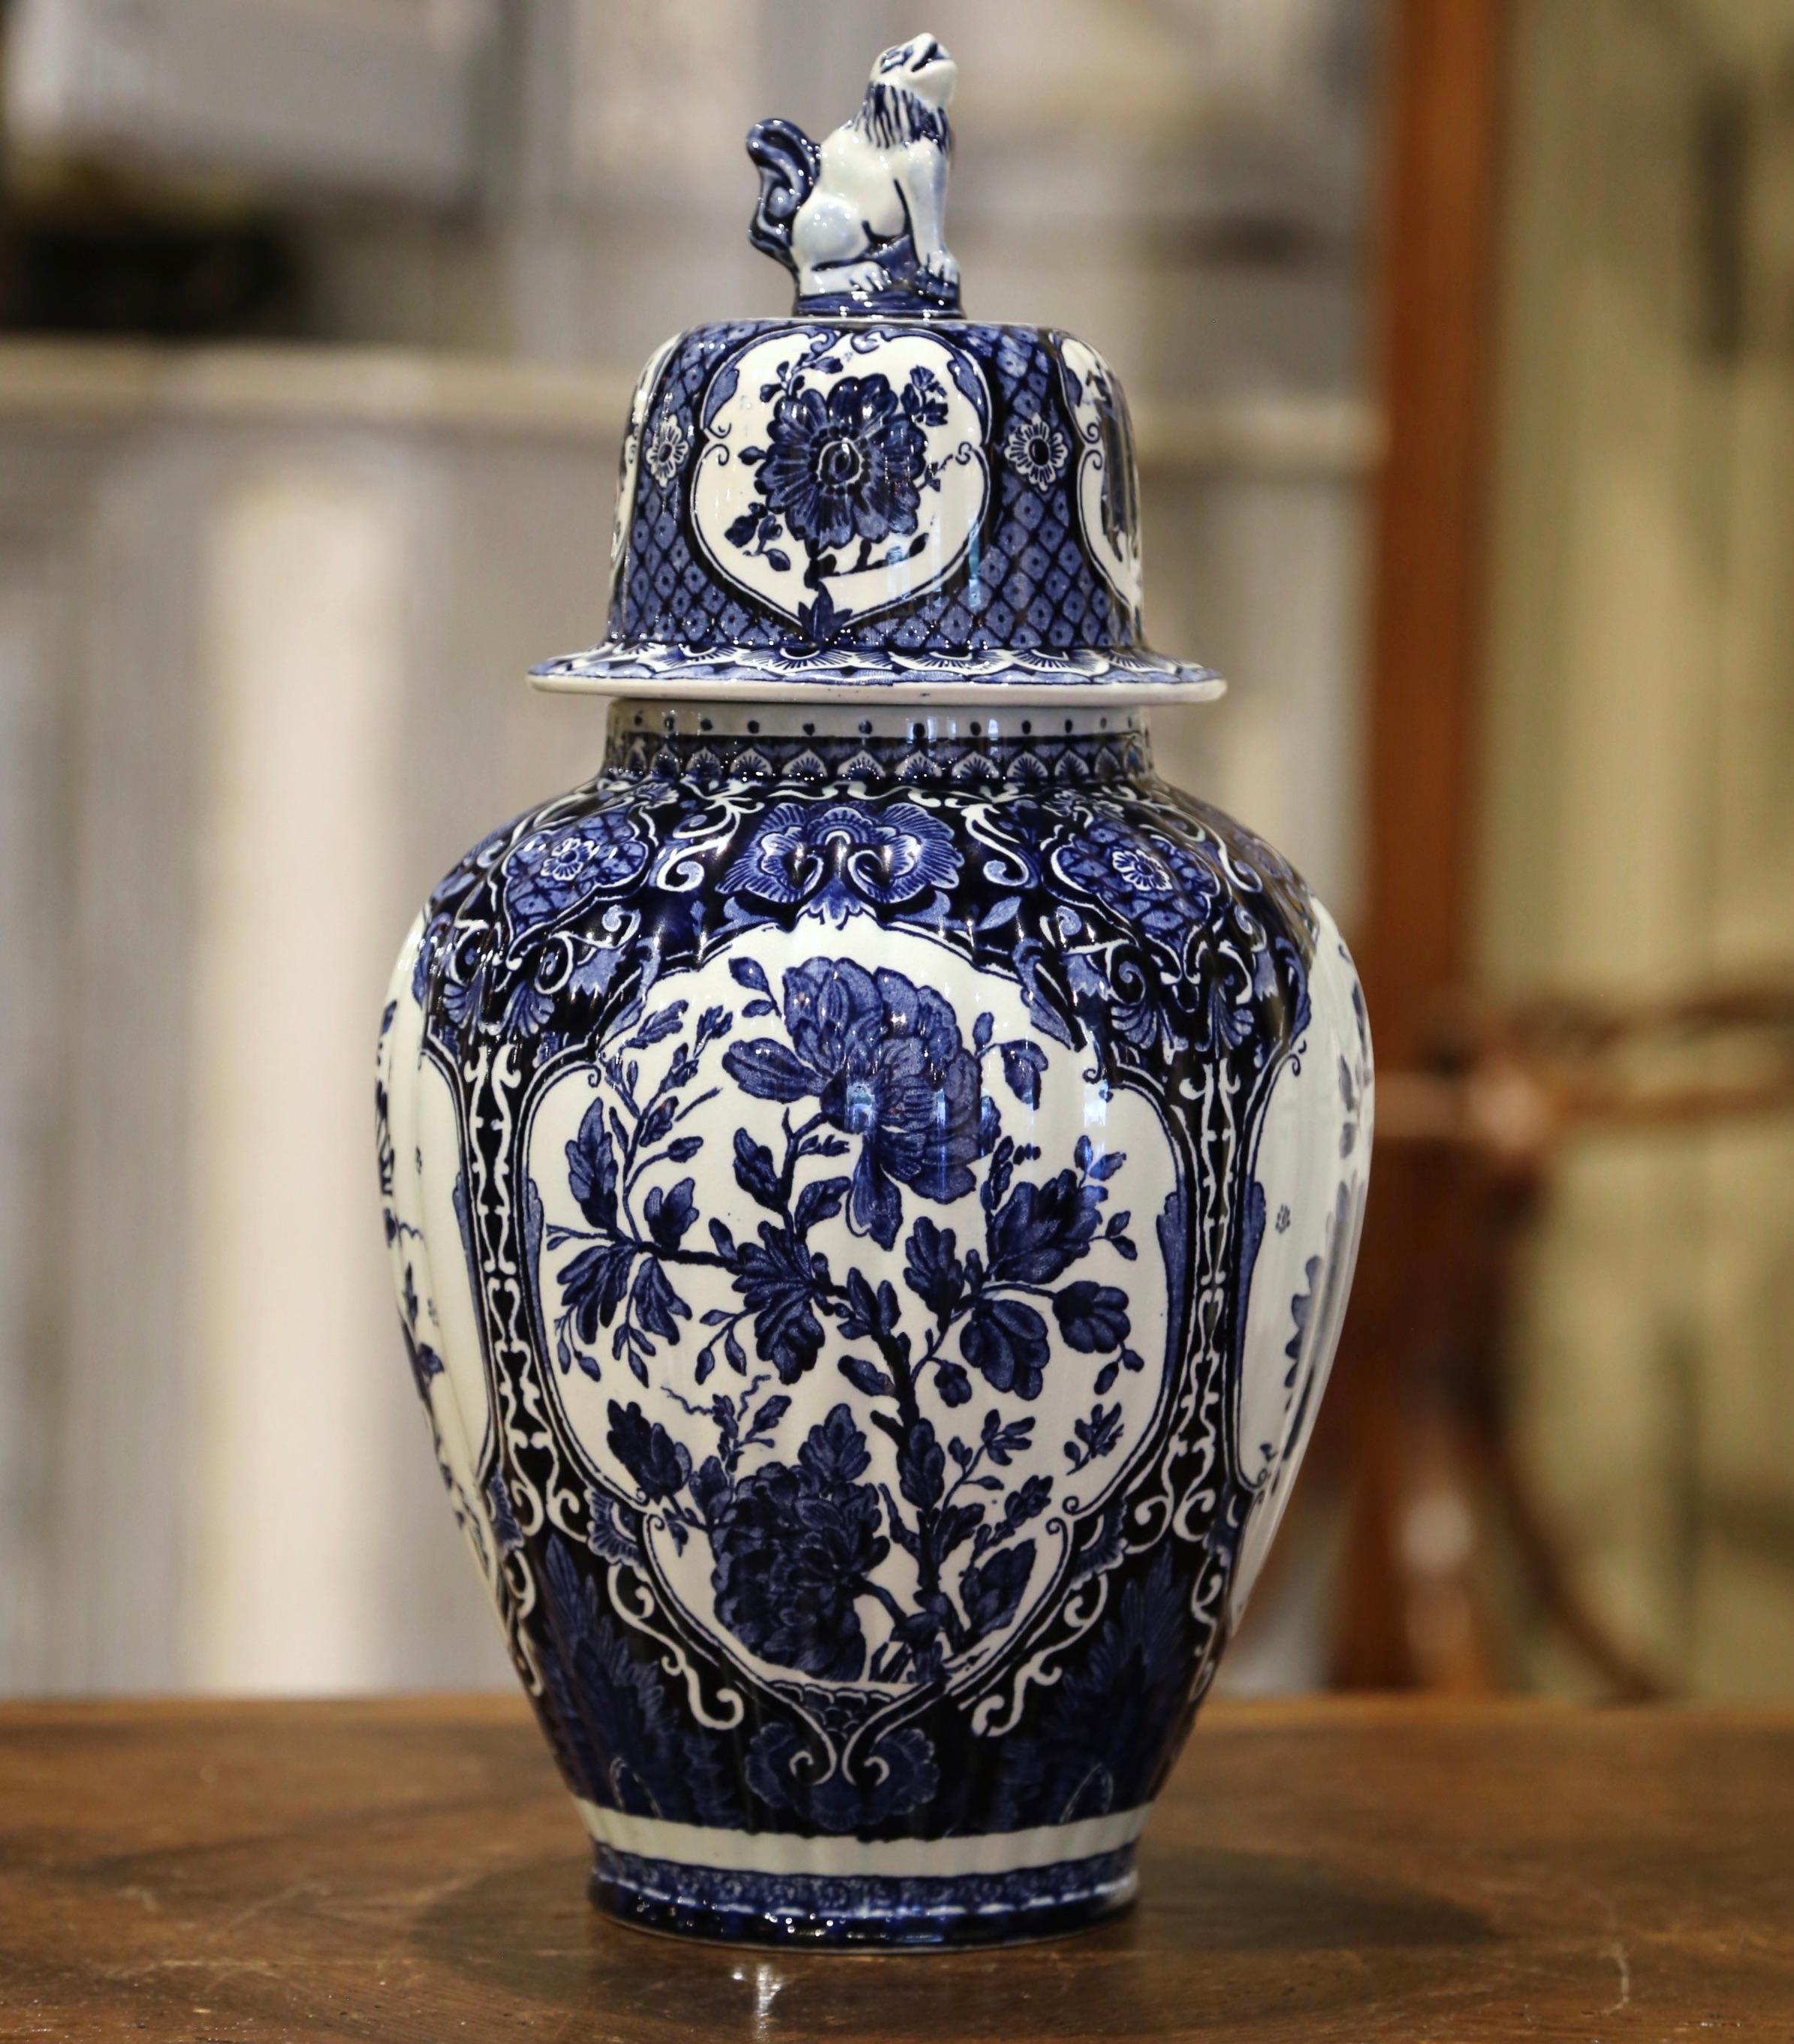 Crafted in Holland, circa 1940, the large faience potiche features hand painted medallions with Classic Dutch flower and foliage decor. The traditional blue and white jar is round in shape and has a cone lid embellished with dog figure at the top.